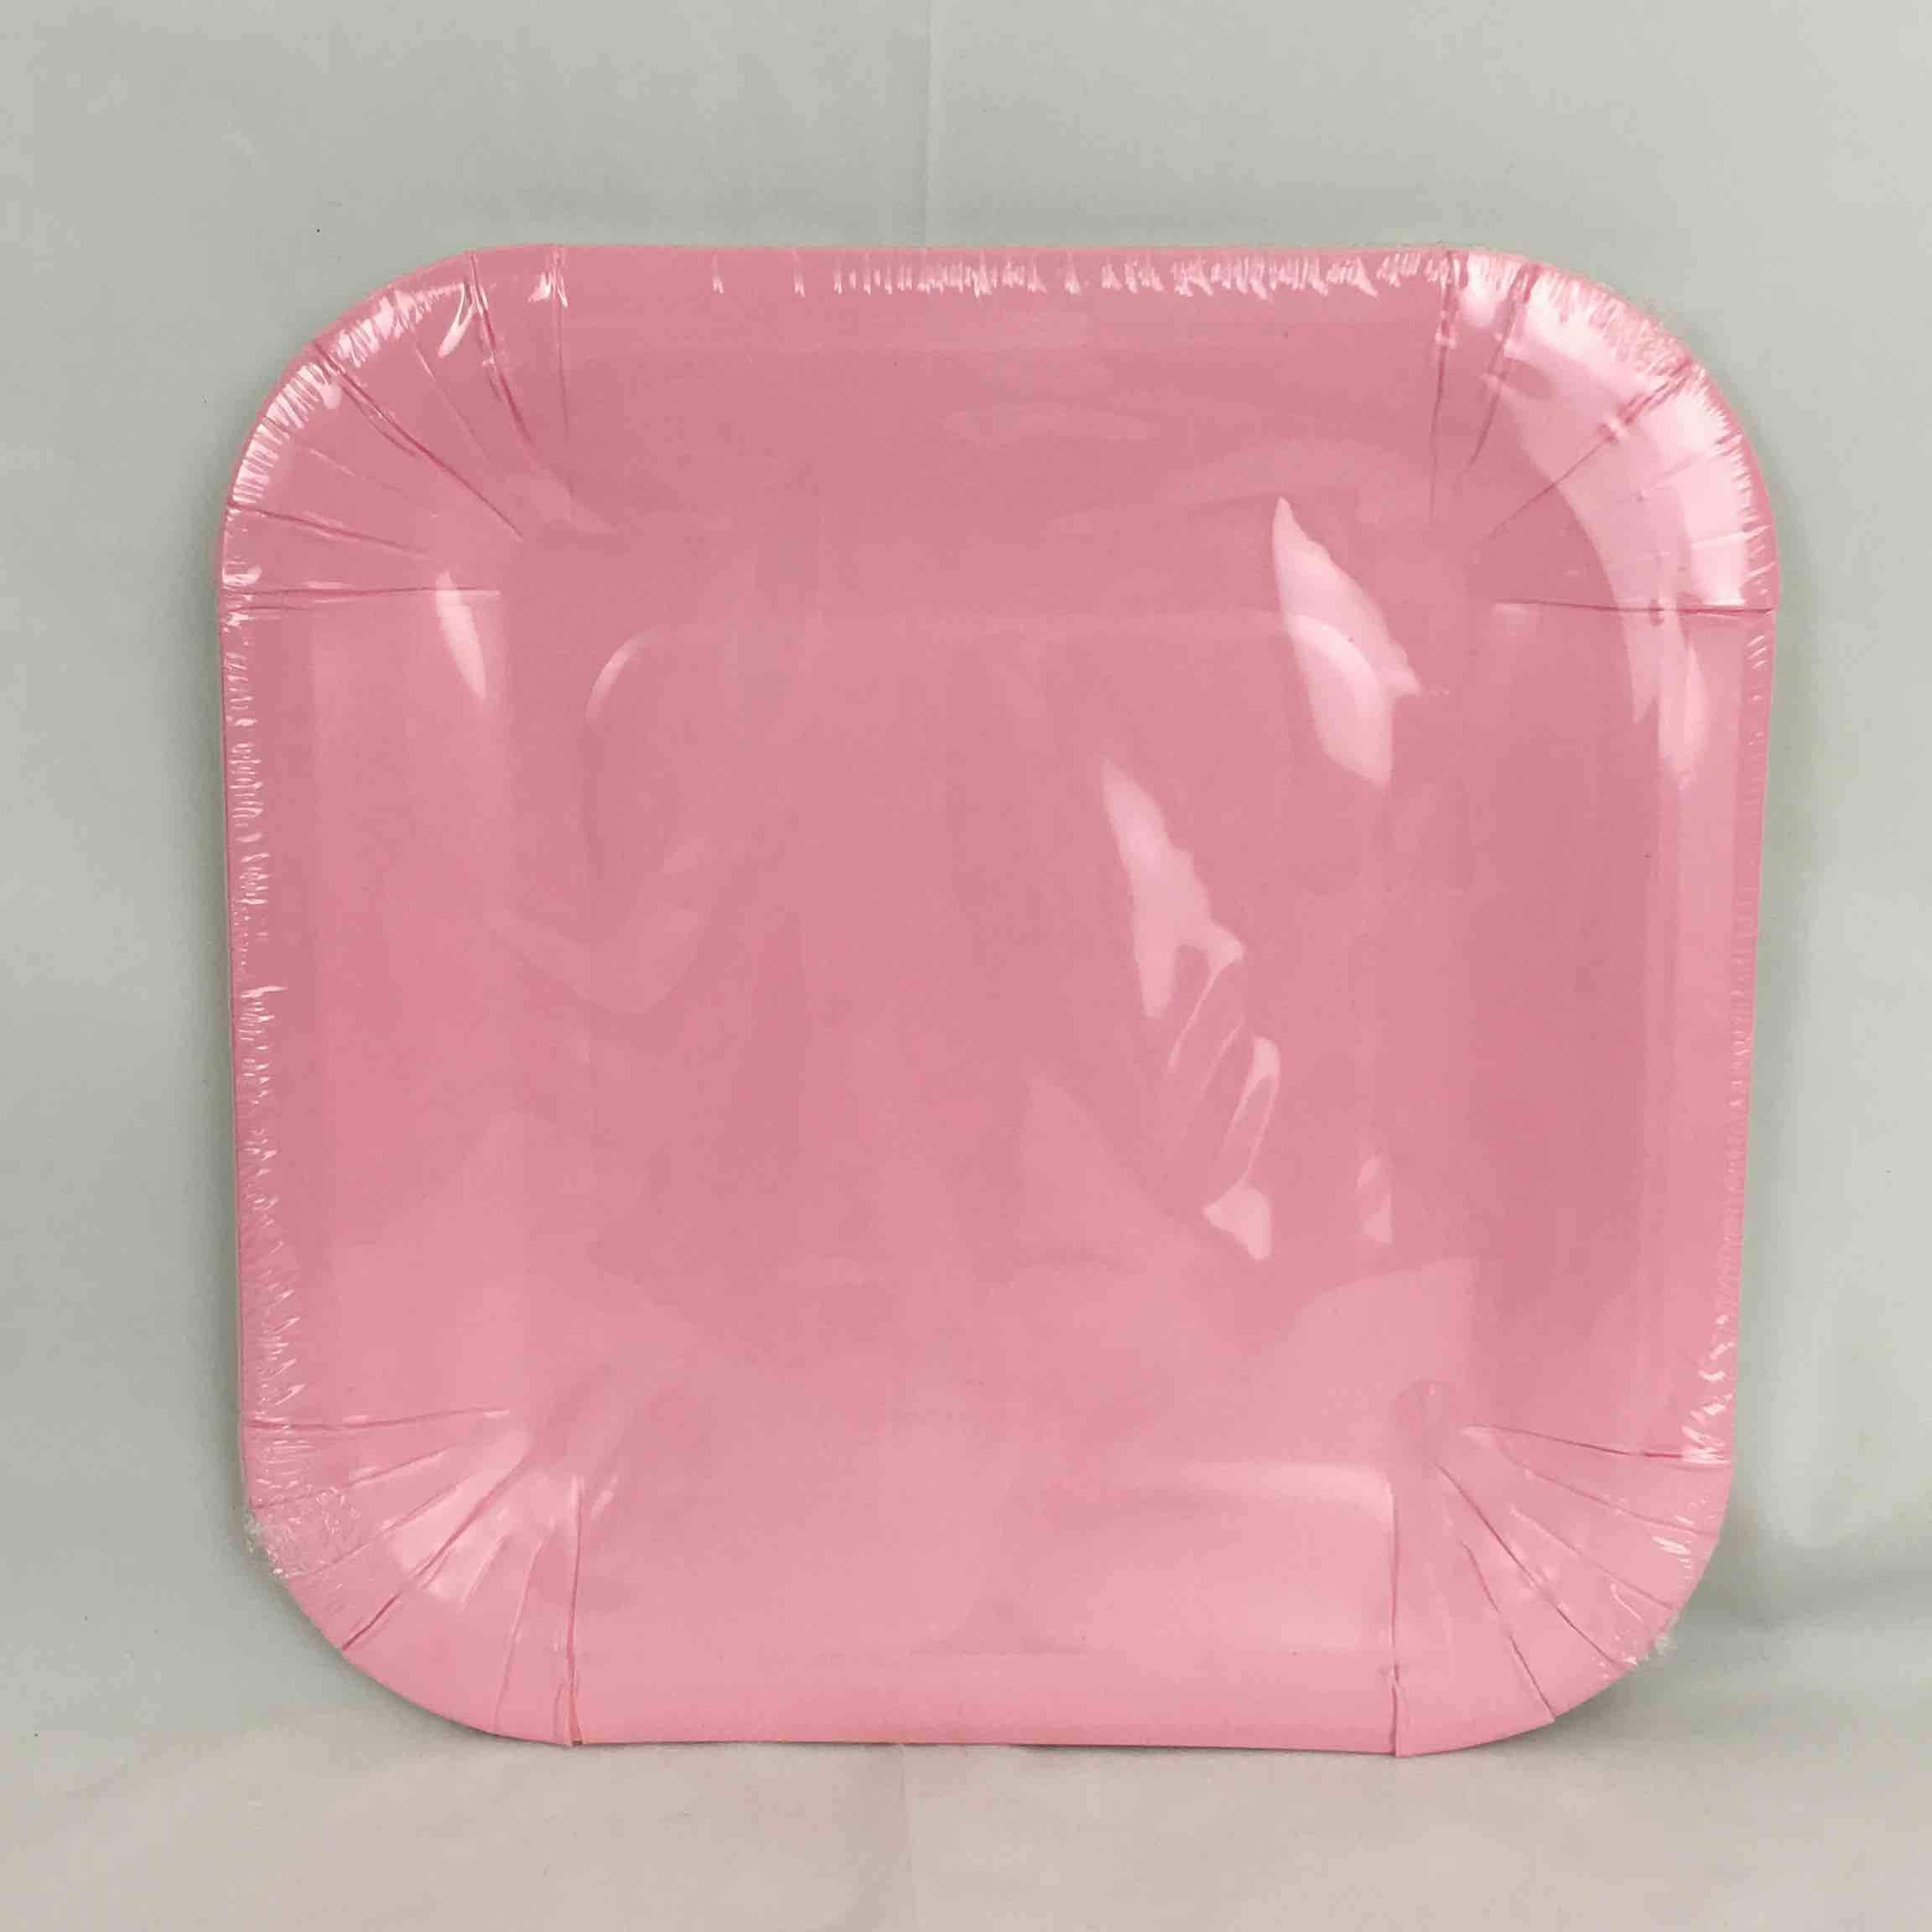 SOLID PASTEL PINK PLATES Square 7in  8pcs